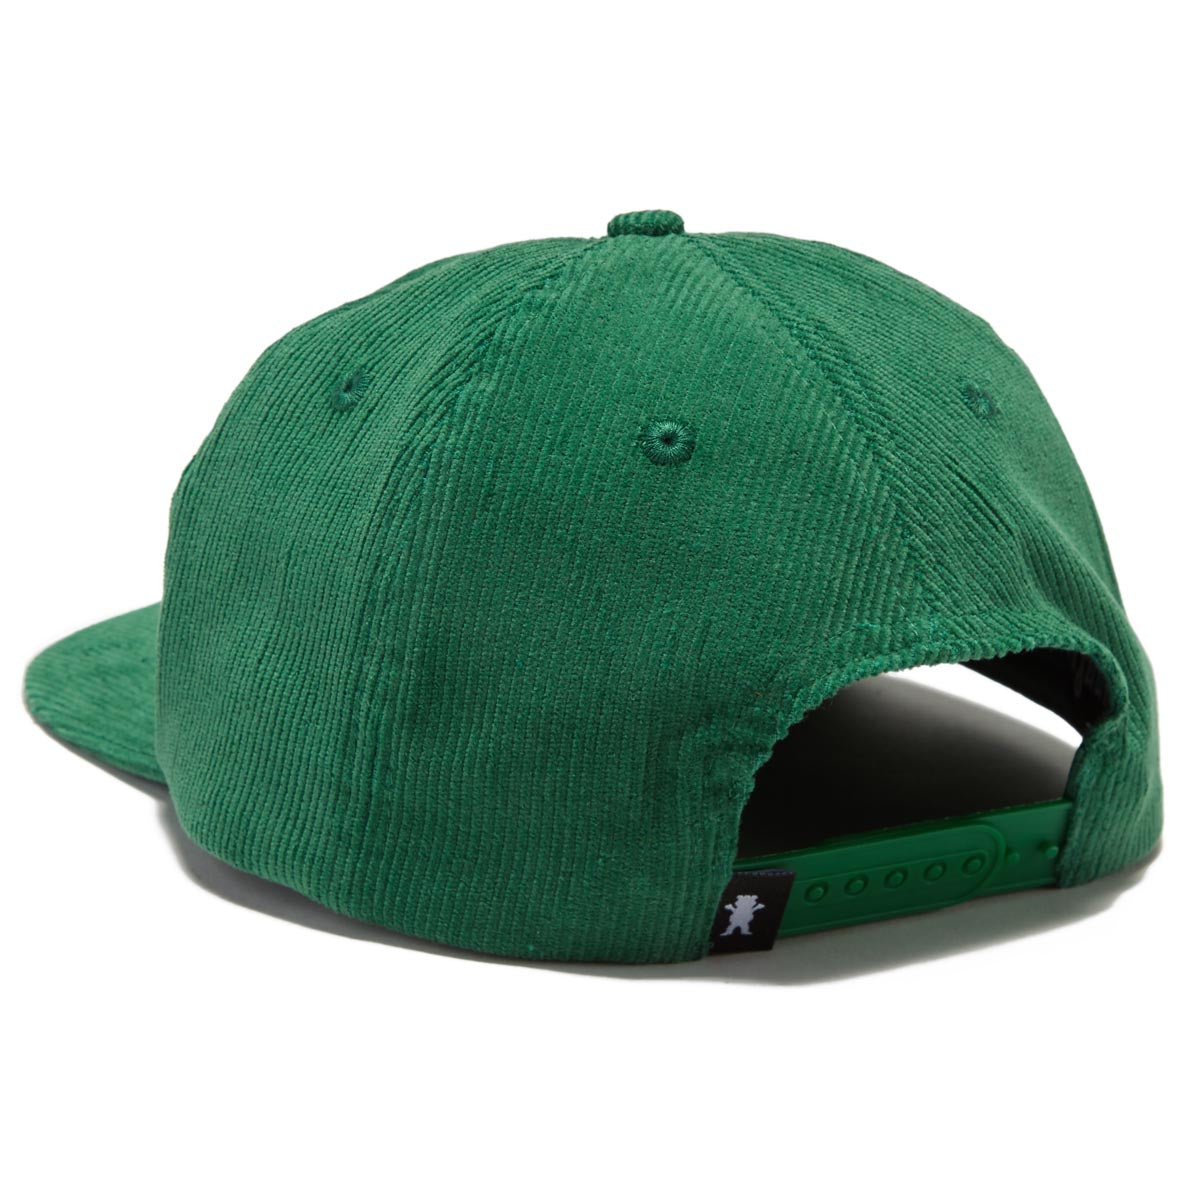 Grizzly Most High Unstructured Snapback Hat - Forest Green image 2